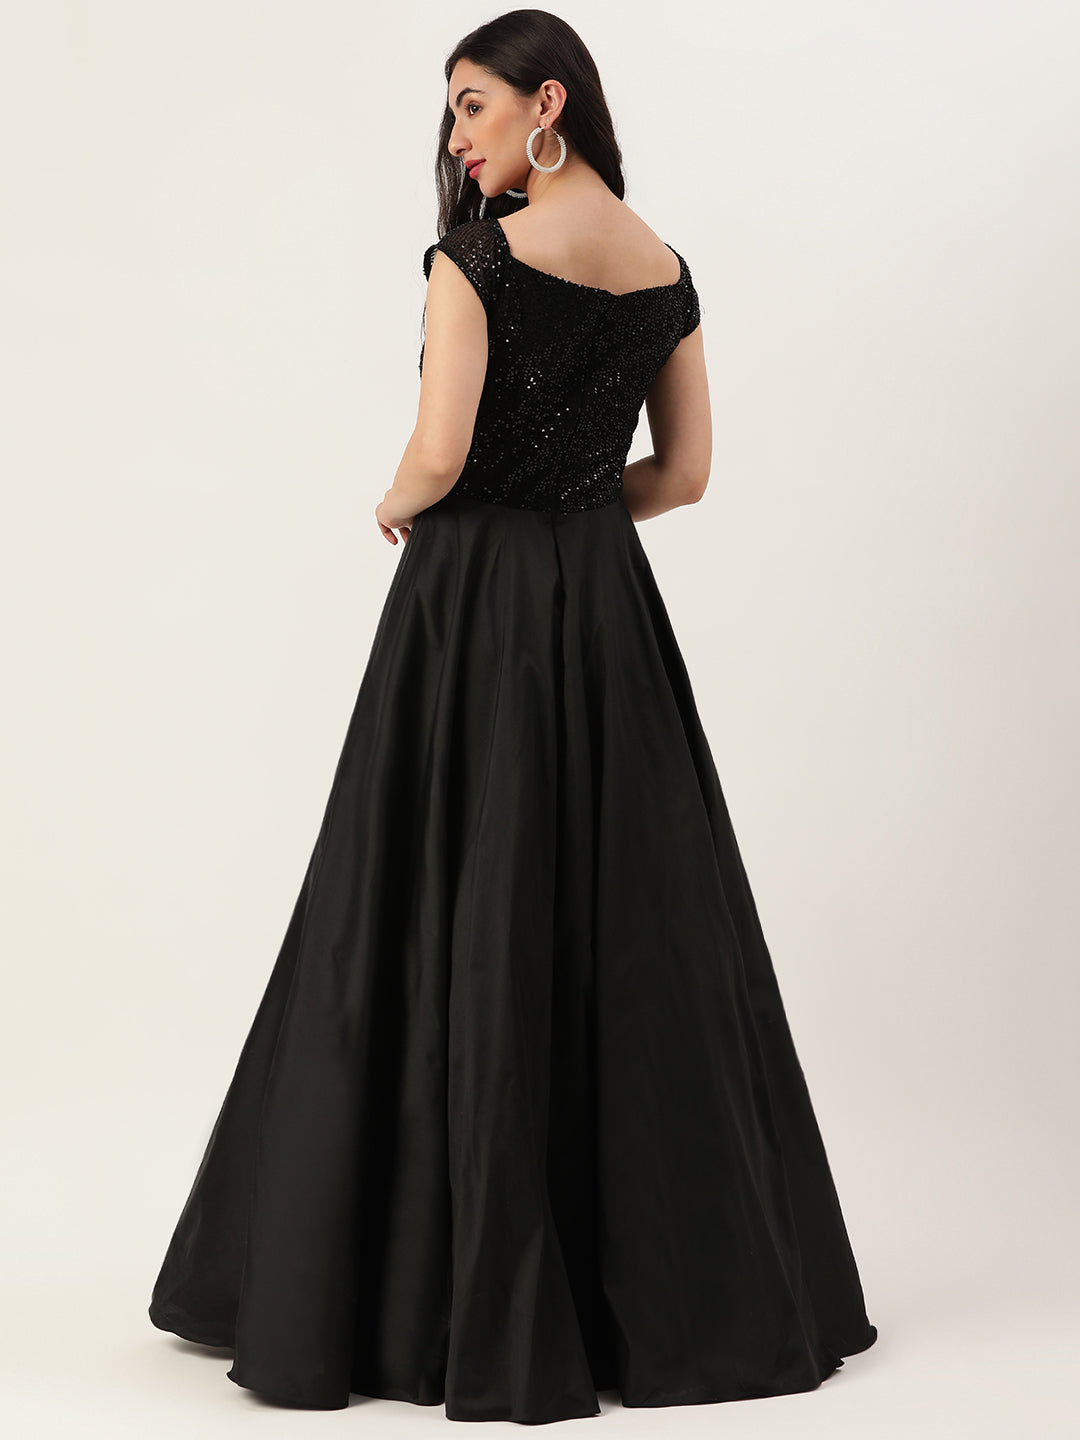 Buy Black Party Wear Indian Gowns Online for Women in USA